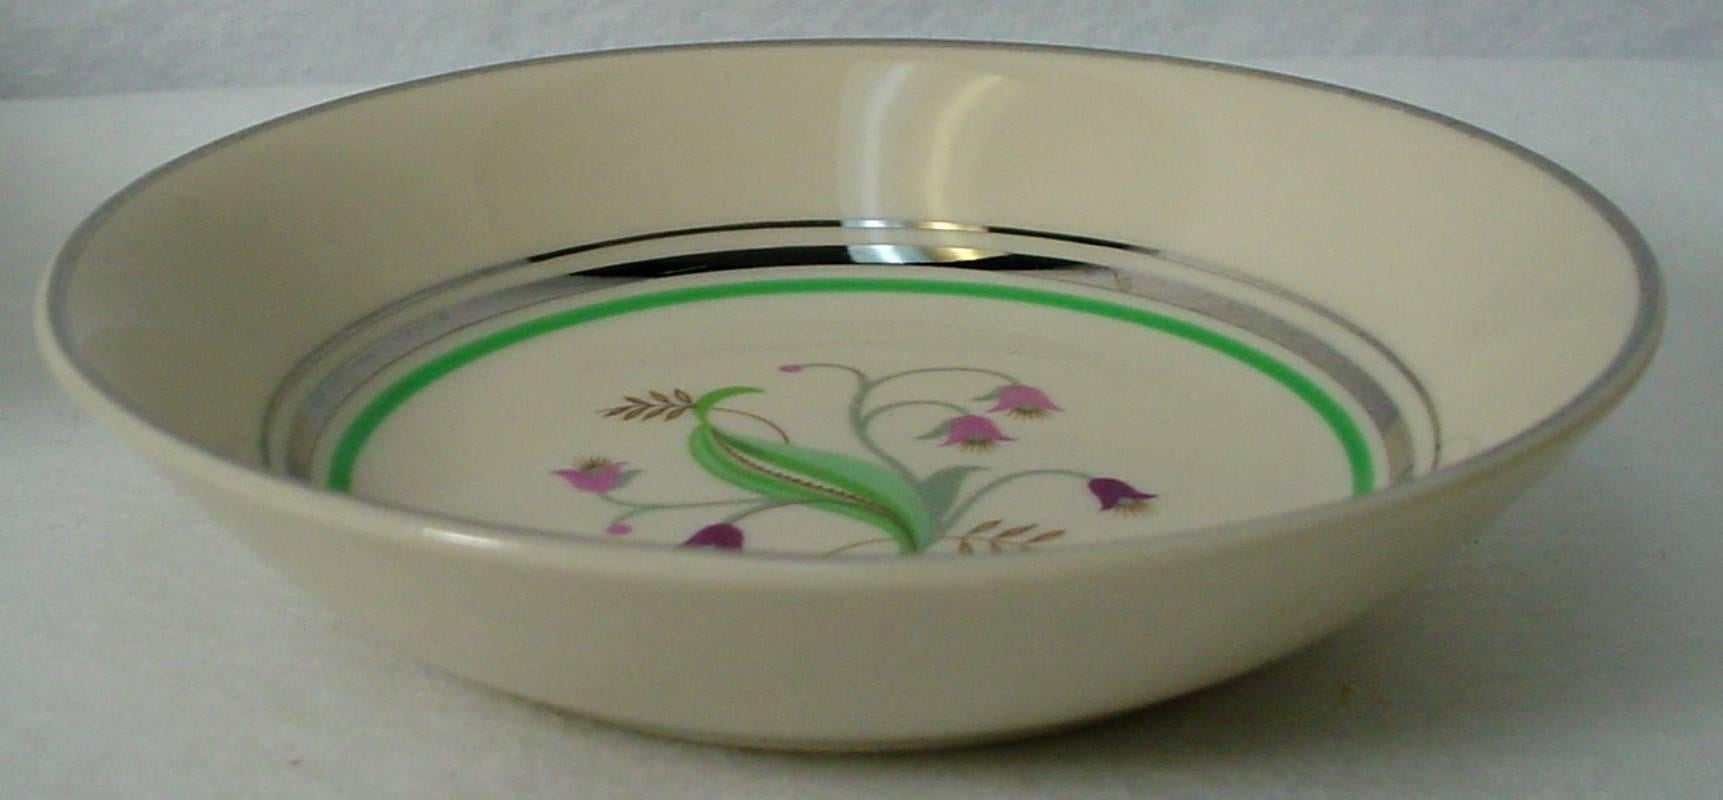 In great condition with minimal use.

Production dates: 1949-1967.

Includes 21 cup, 16 saucer, 12 dinner plate, one dinner plate large, 14 salad plate four bread plate, 12 fruit or berry bowl, and 12 soup or salad bowl.

Federal